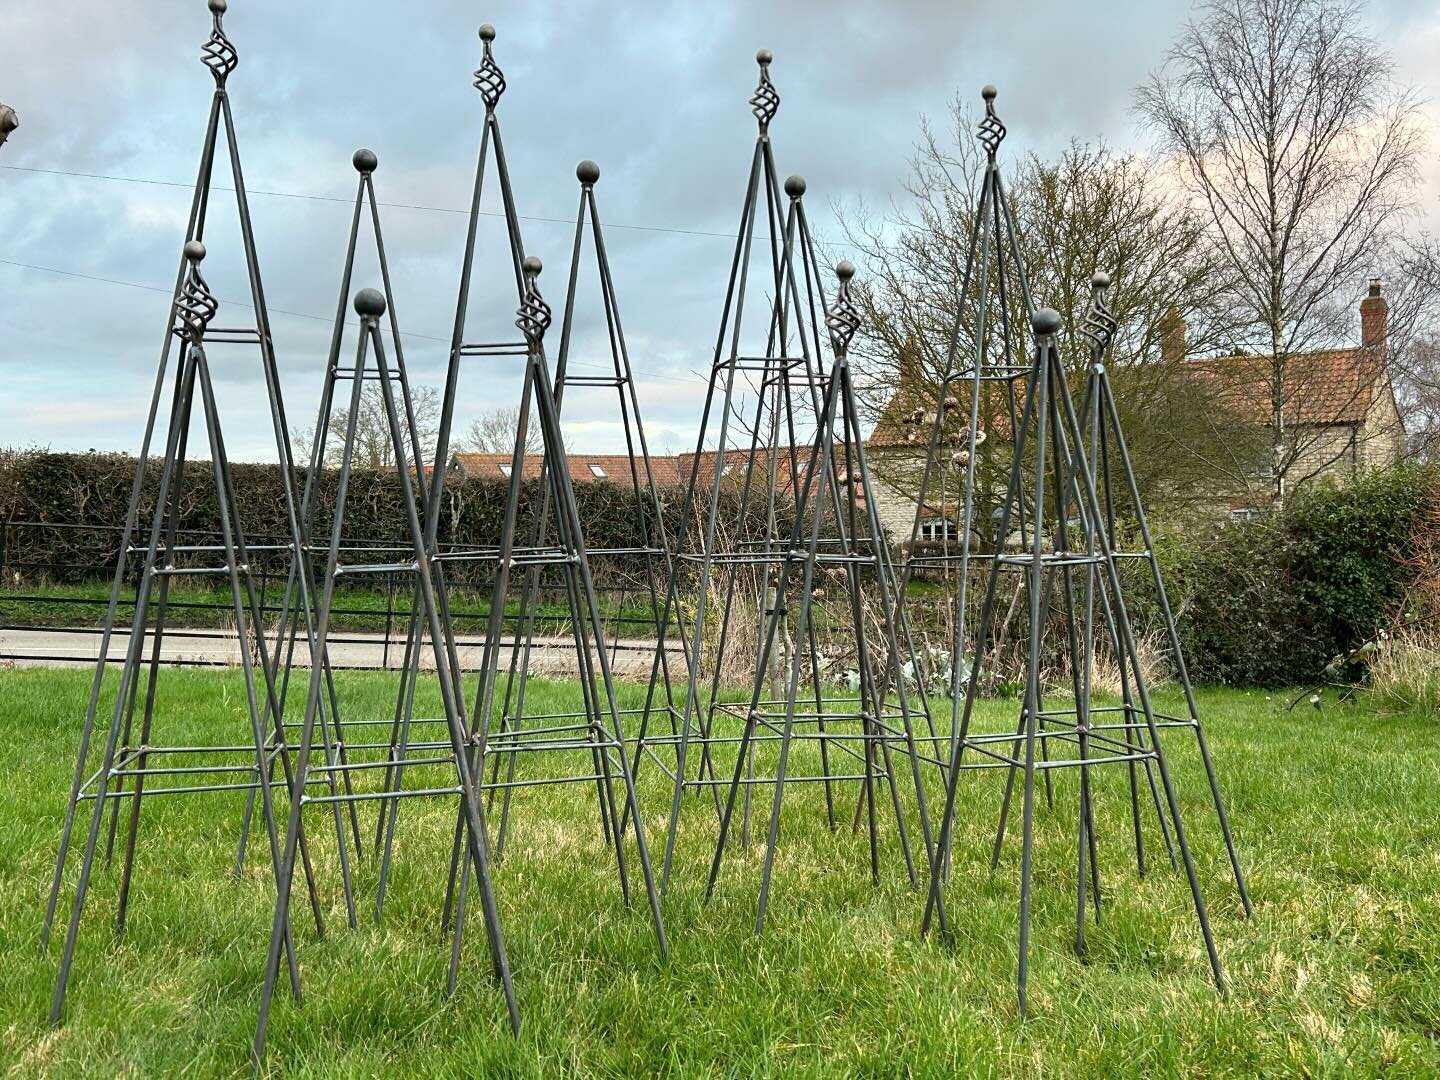 Busy day in the workshop today. Made a forest of #obelisk. 
Our customers have been asking for obelisk so we have created a simple design with a decretive top to match our garden stakes. 

Details will be on the website one I figure out how to take d